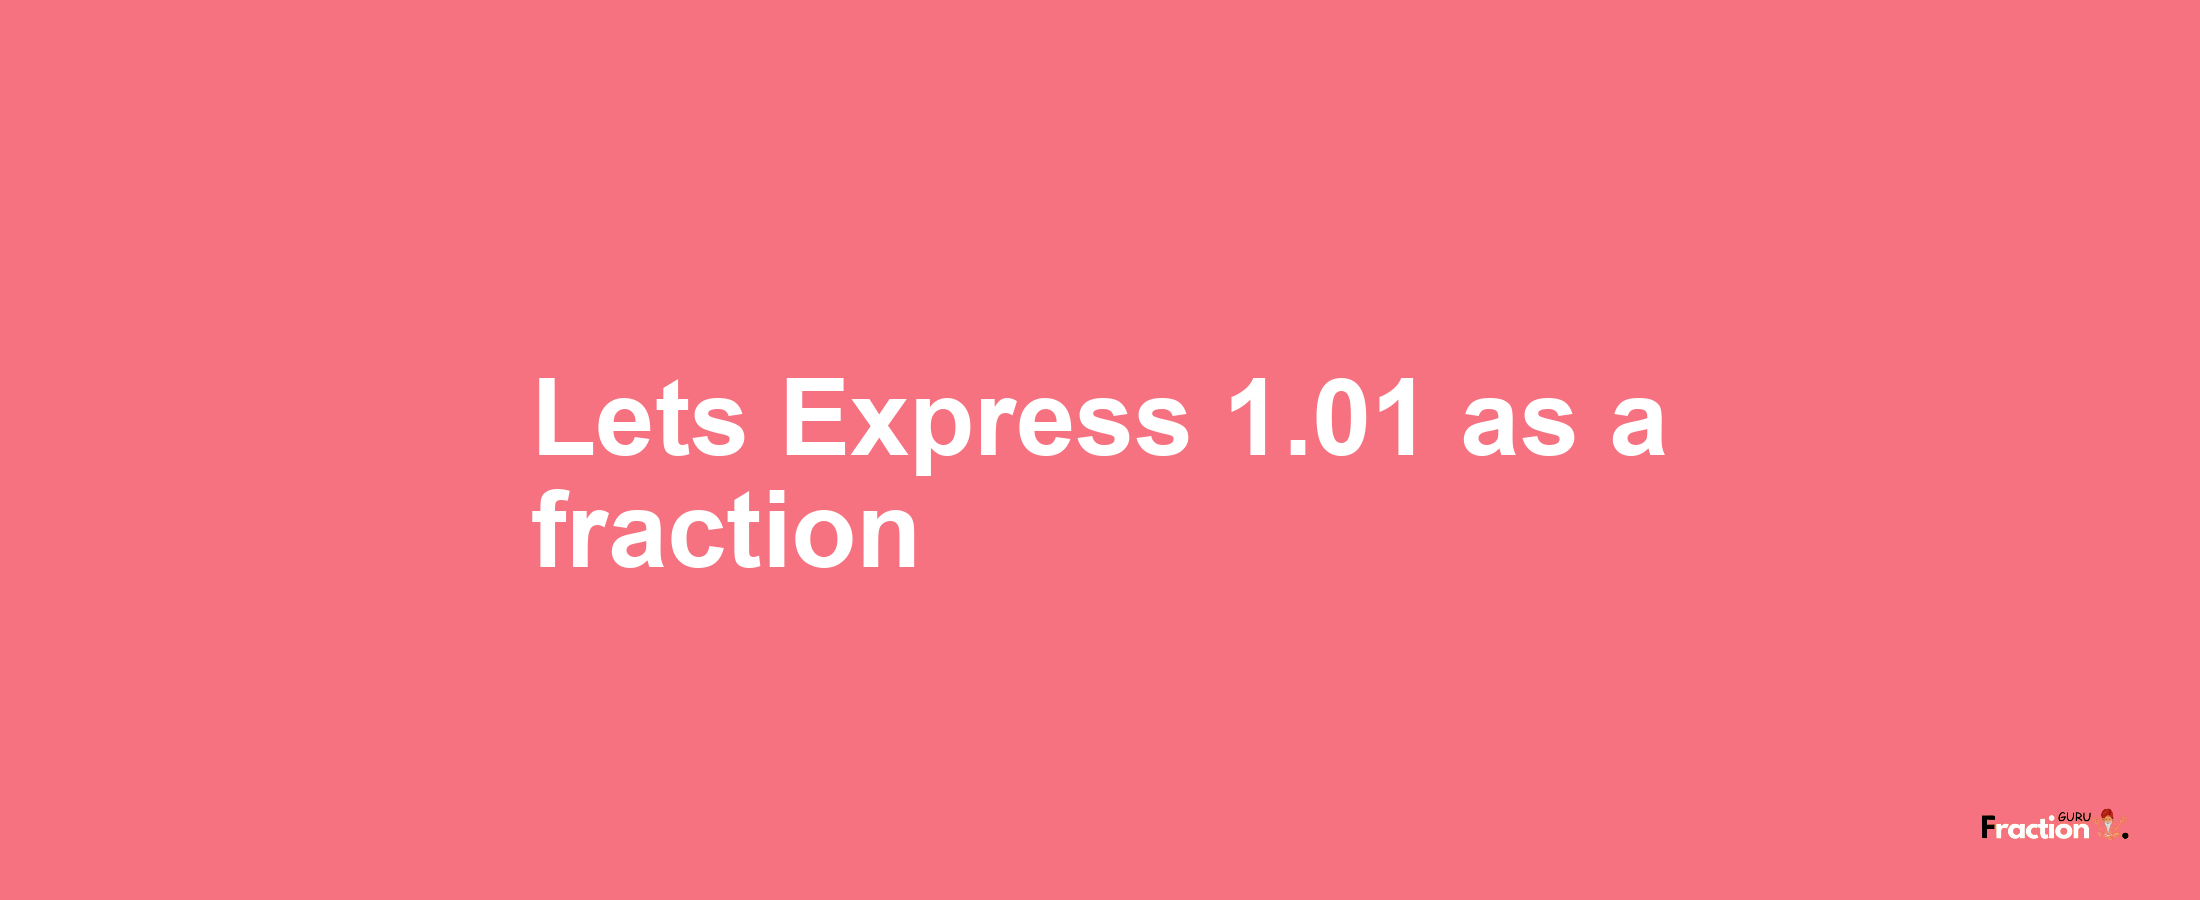 Lets Express 1.01 as afraction